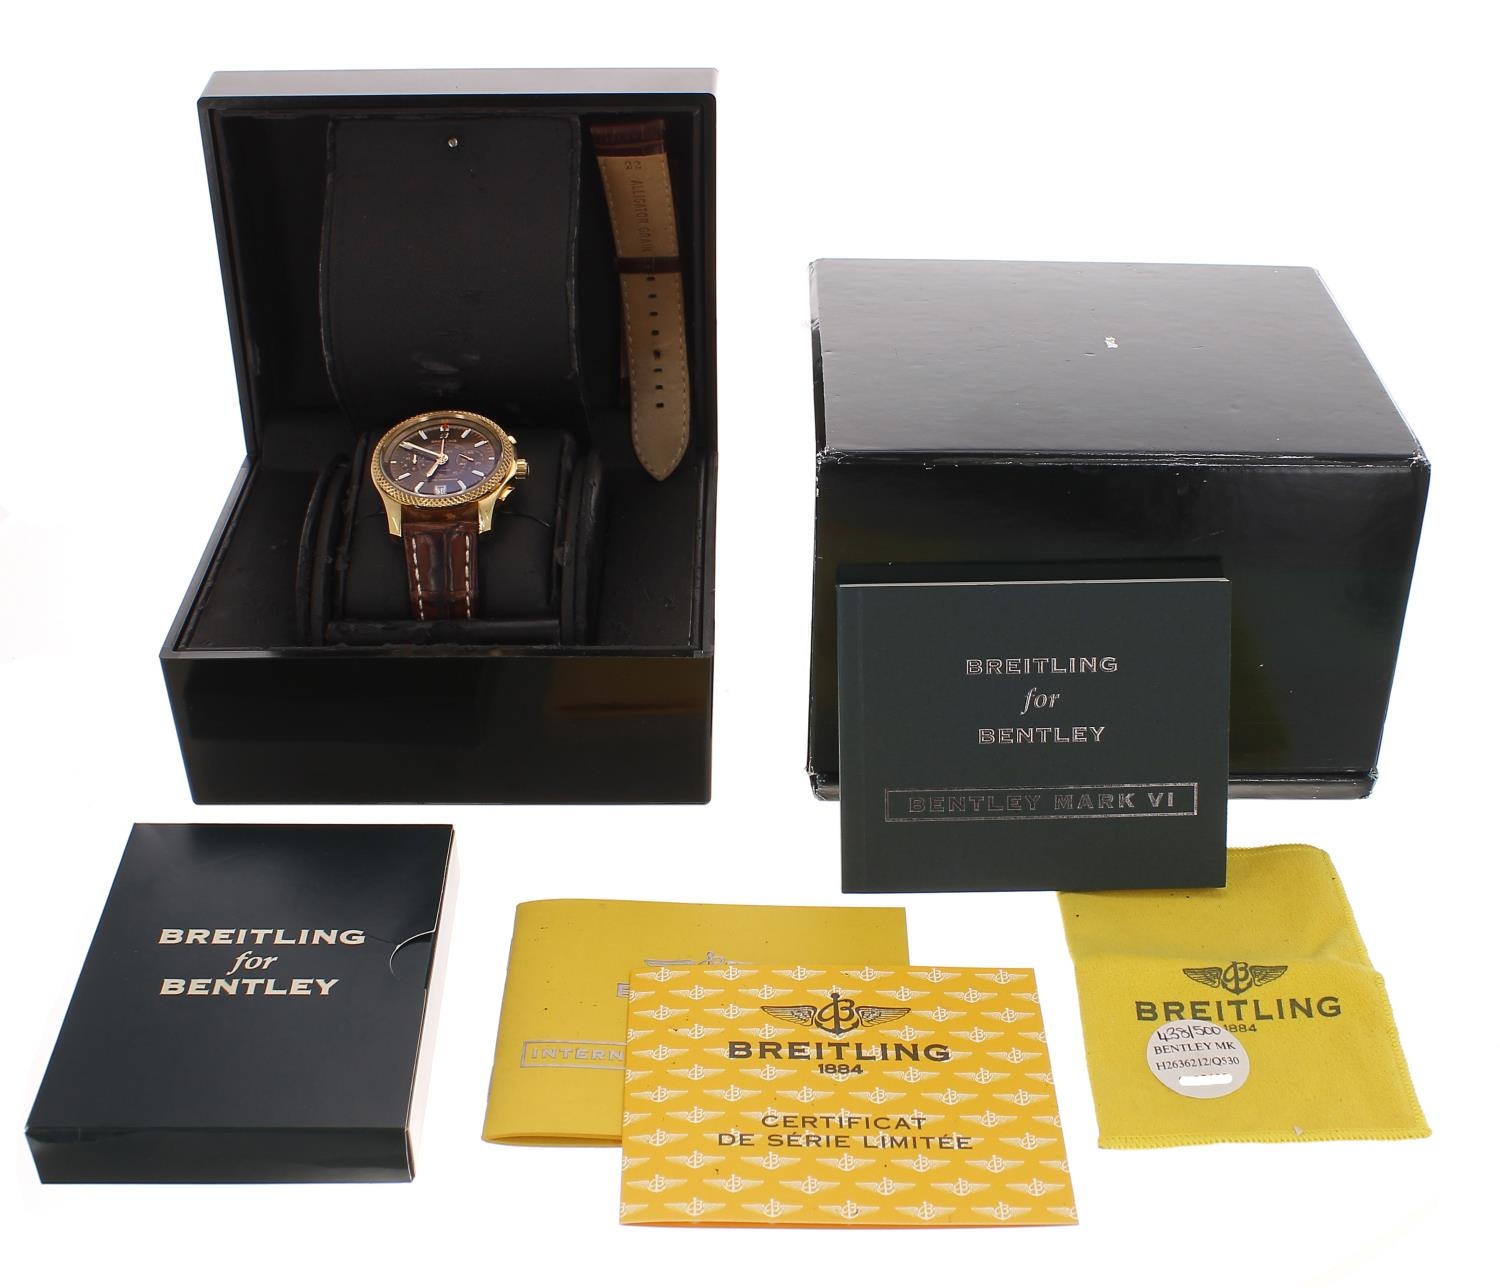 Rare Breitling for Bentley Mark VI Special Edition Chronograph Chronometer automatic 18ct rose - Image 3 of 7